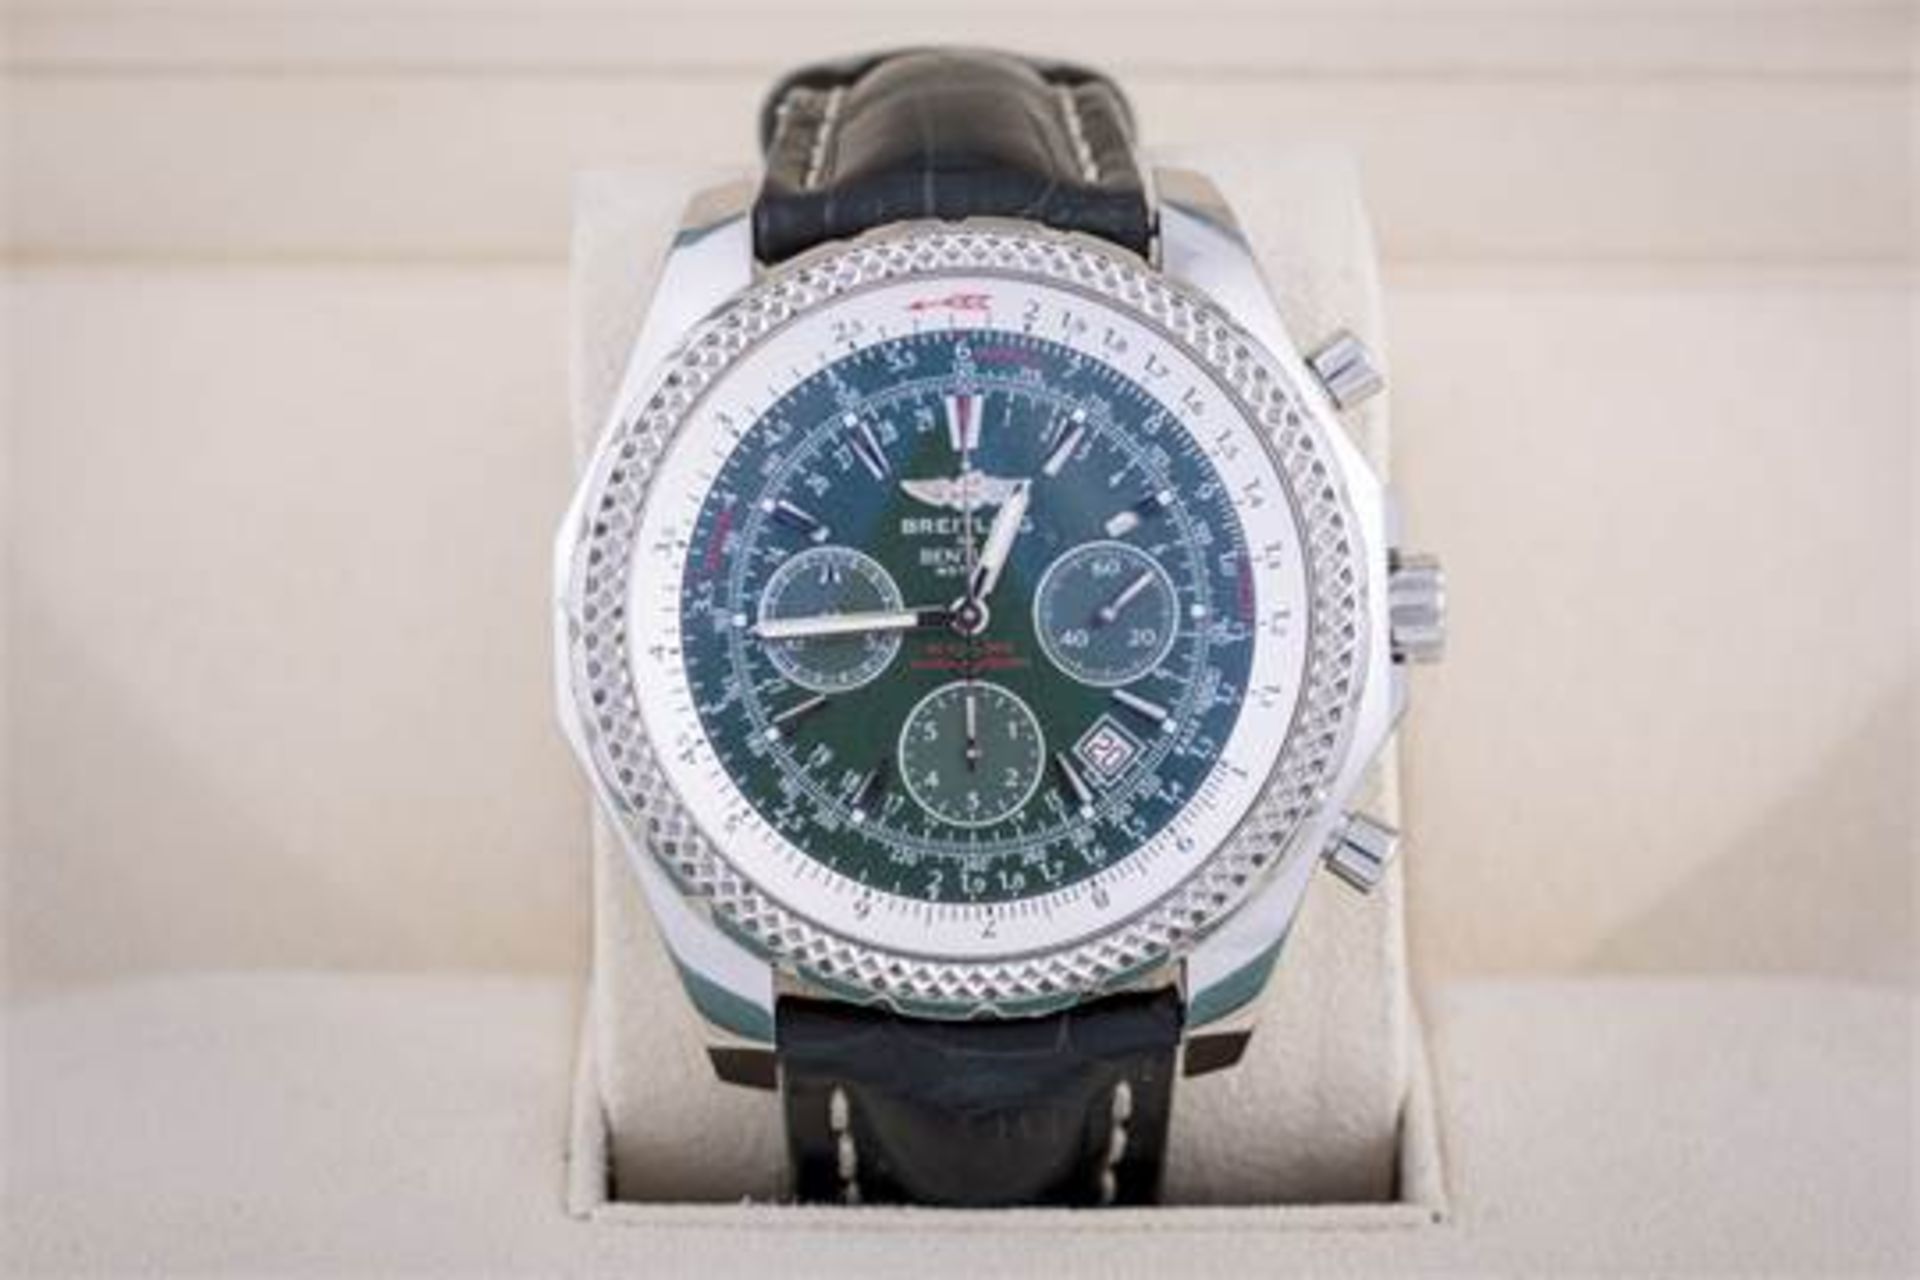 BRIETLING FOR BENTLEY SPECIAL EDITION, CERTIFIED CHRONO, MODEL- A25362, GREEN FACE, WATCH ONLY